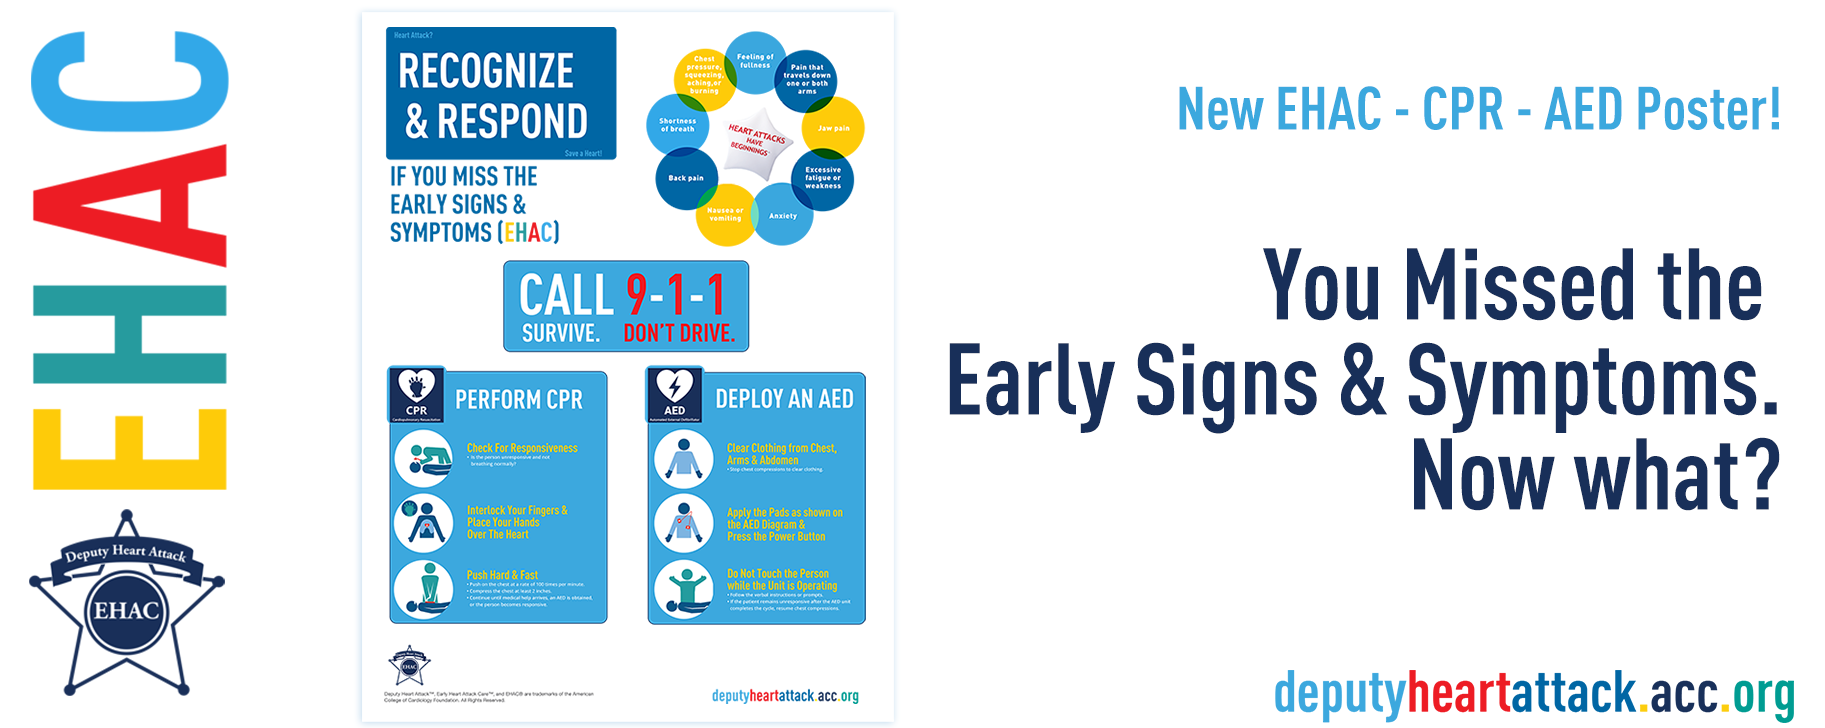 NEW EHAC CPR AED Poster